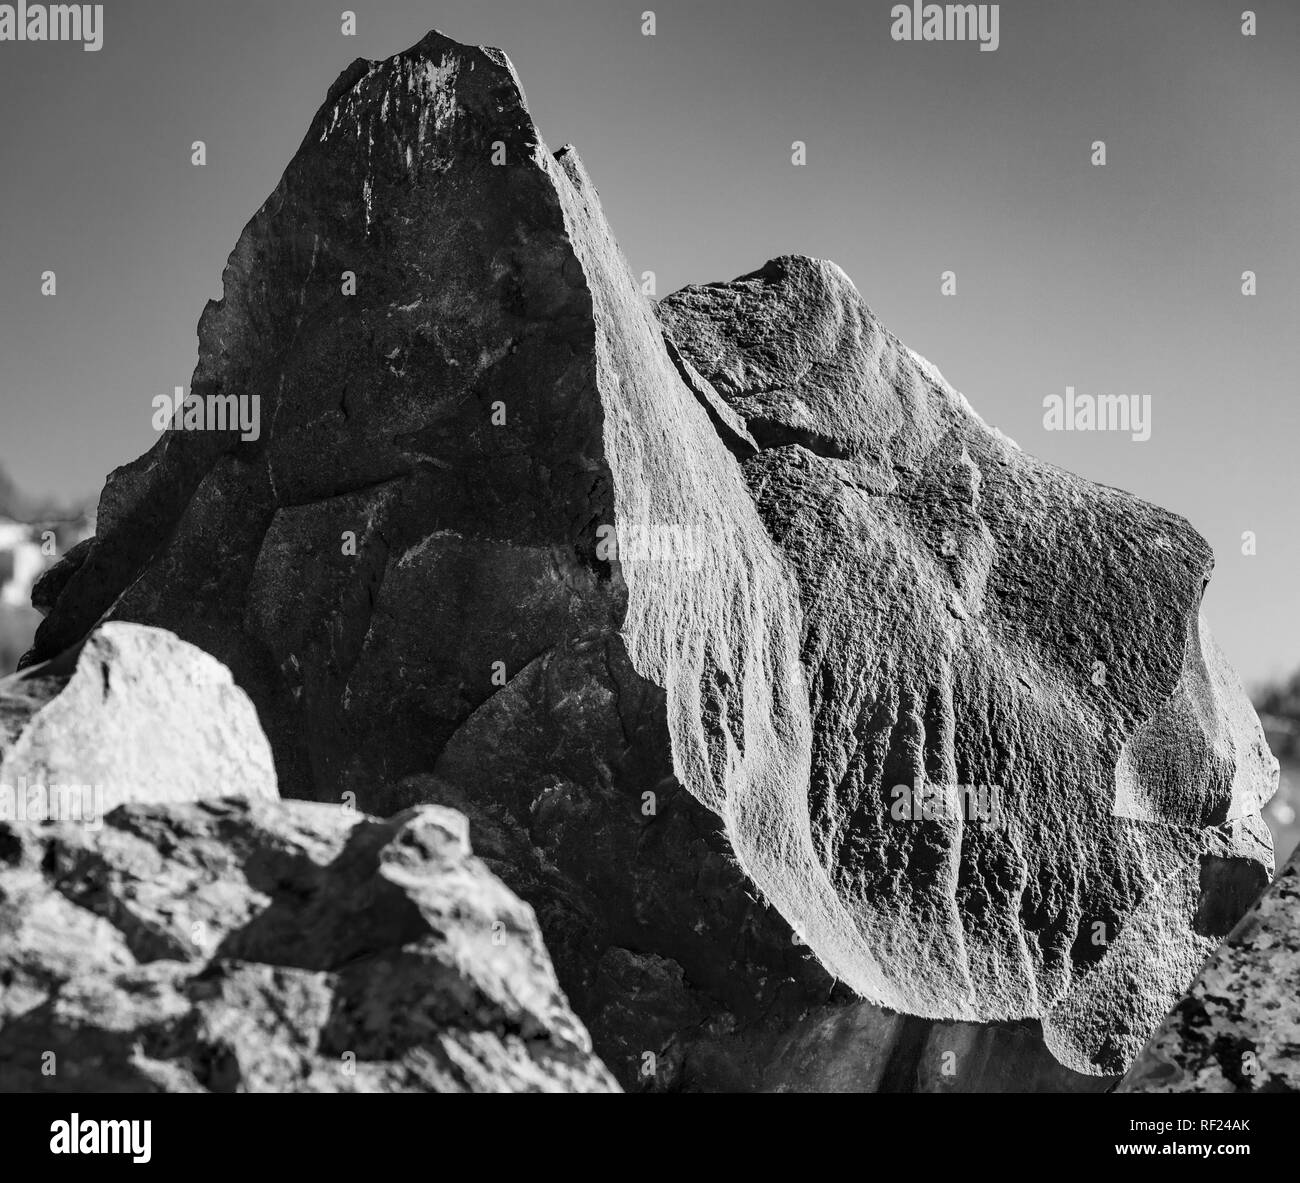 South Africa, Cape Town, Rock formation, black and white Stock Photo